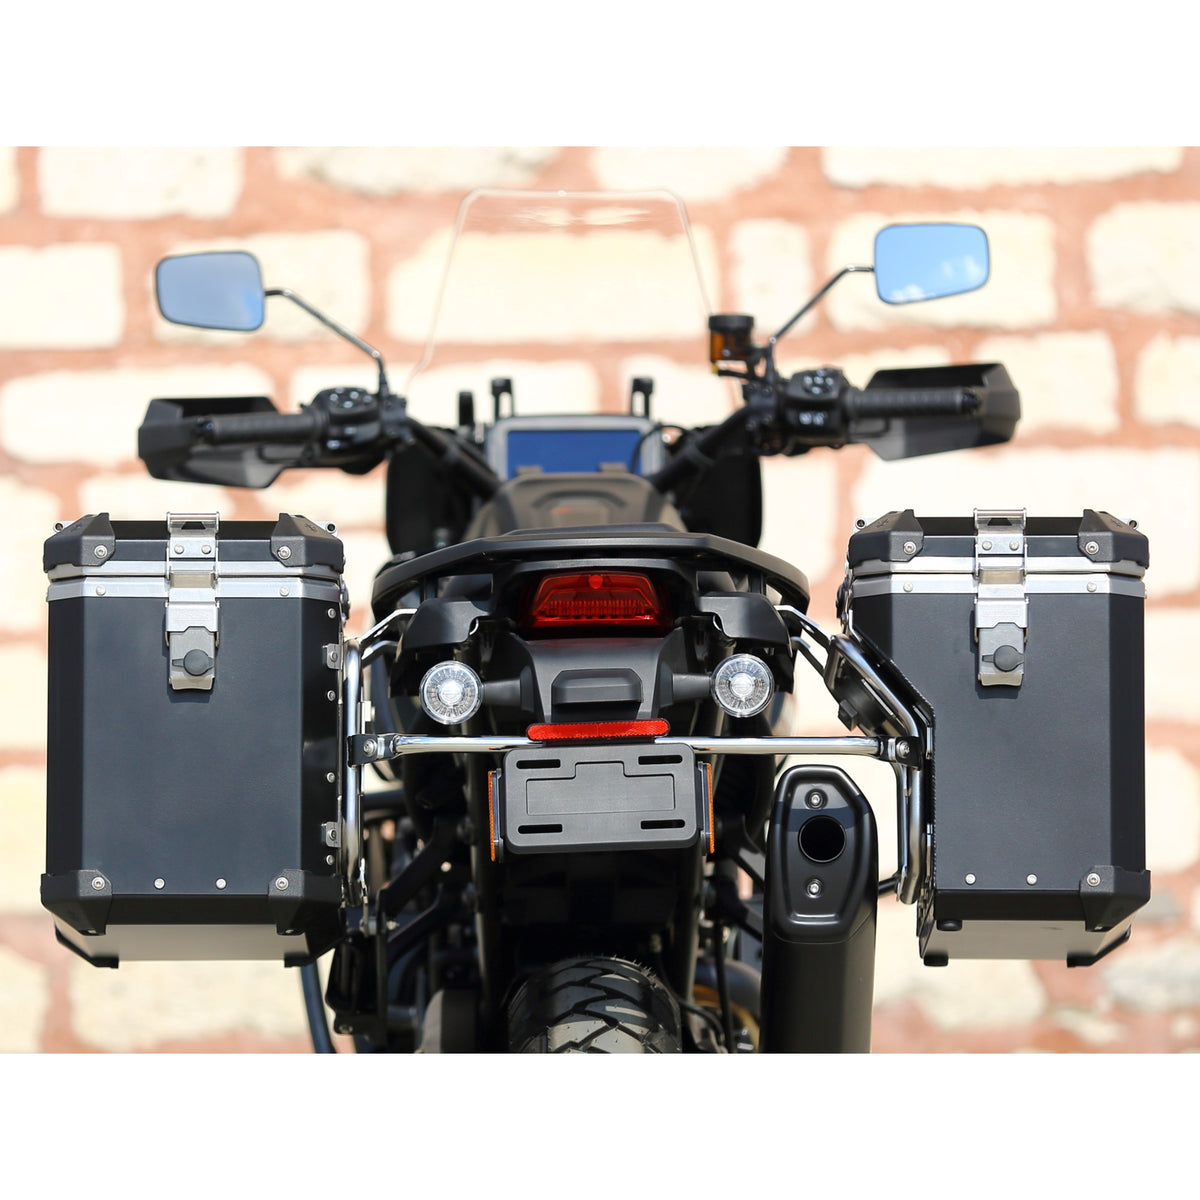 Pannier Carrier for Harley Davidson Pan America 1250, 1250 Special